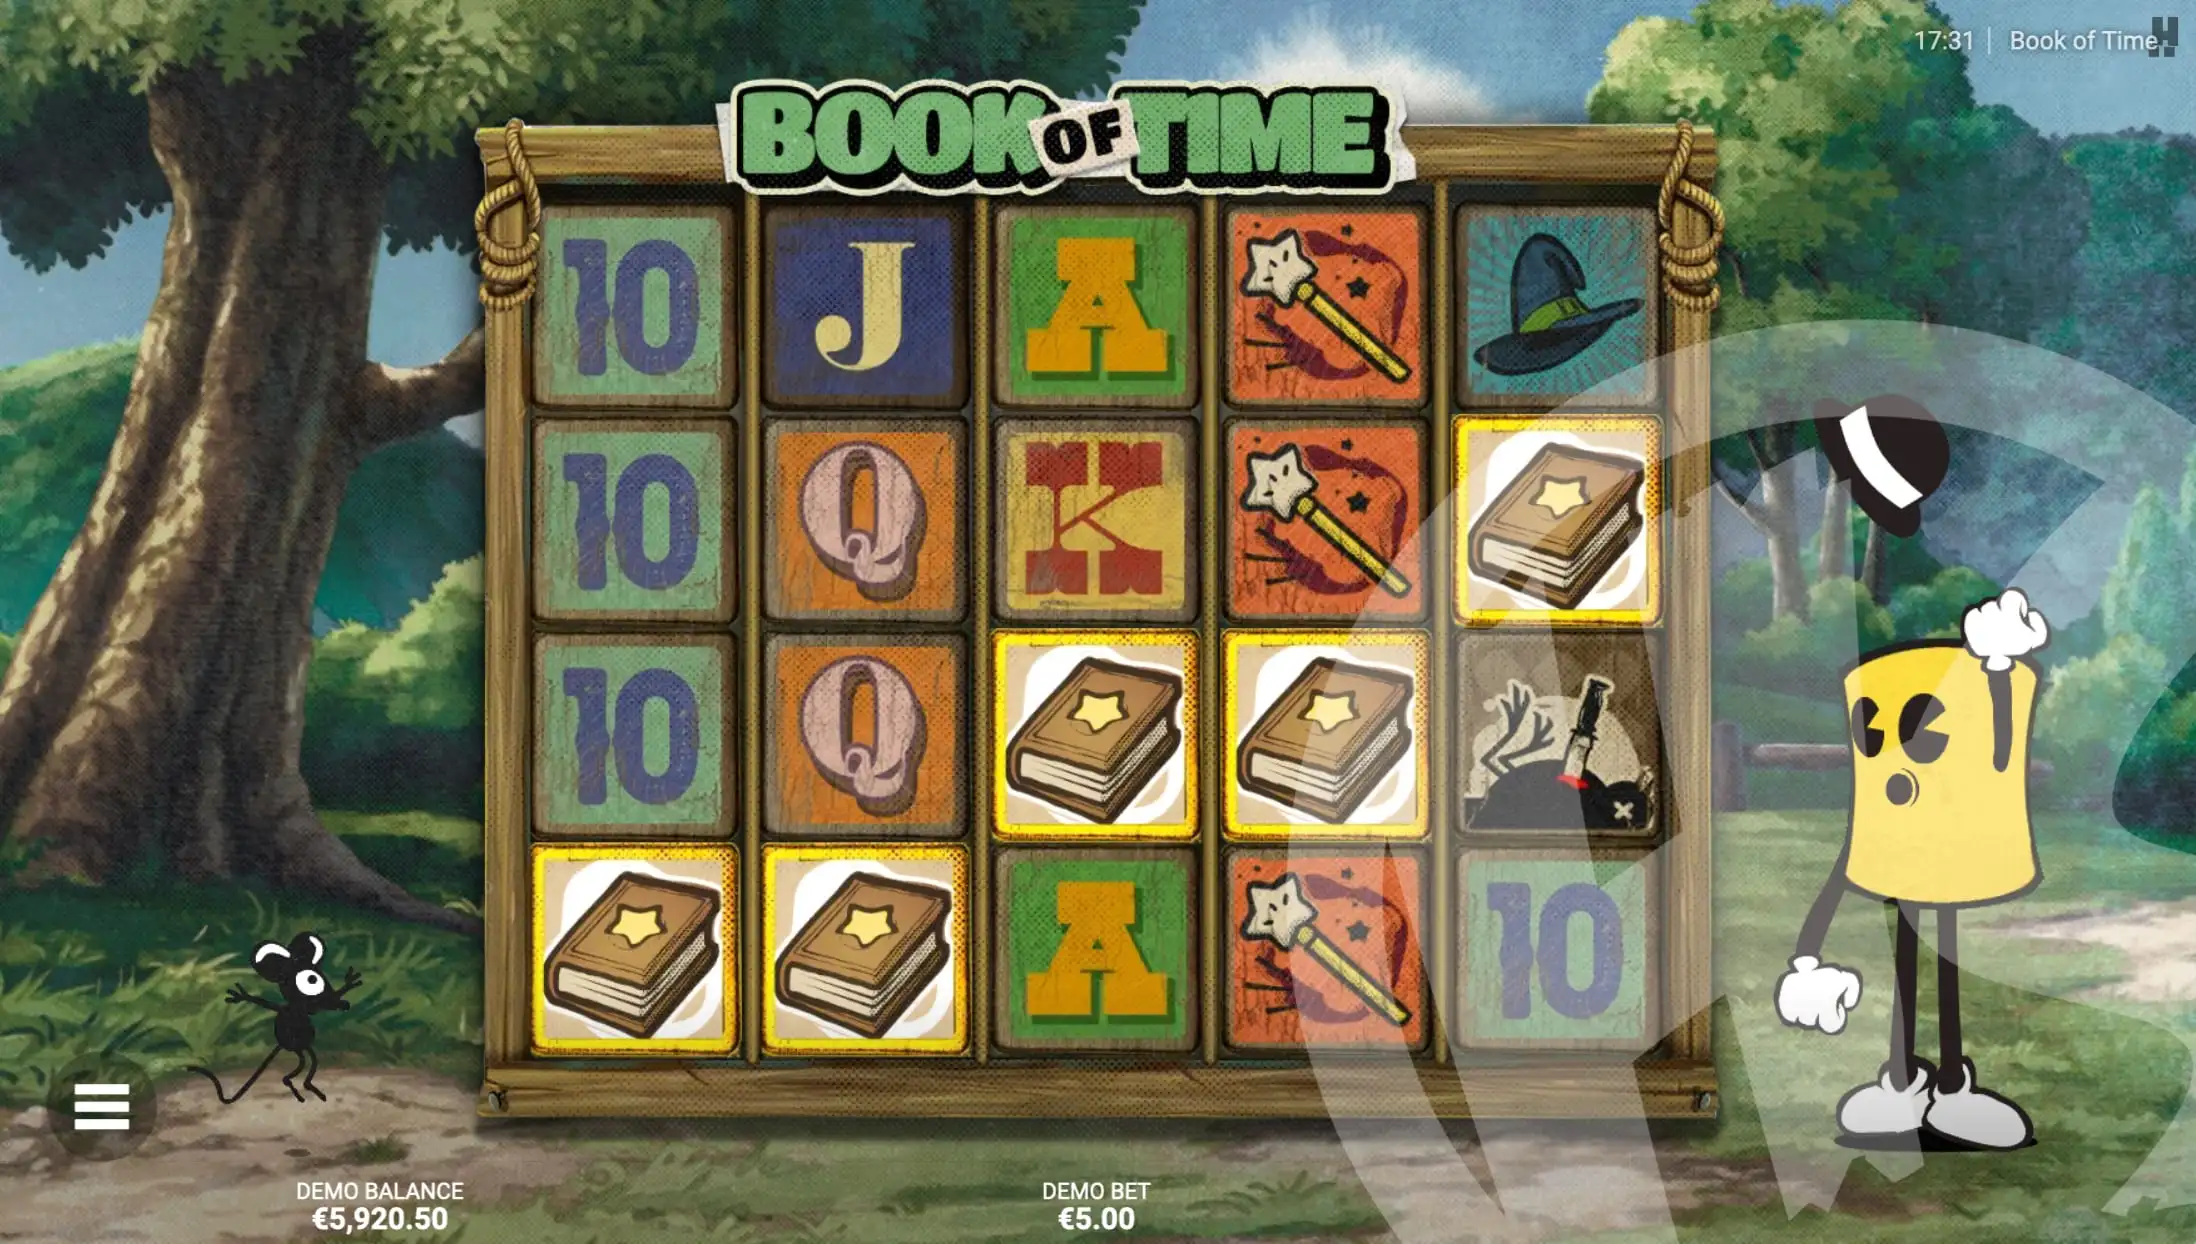 Land 3 or More Book Scatter Symbols to Trigger It's a Classic! Free Spins